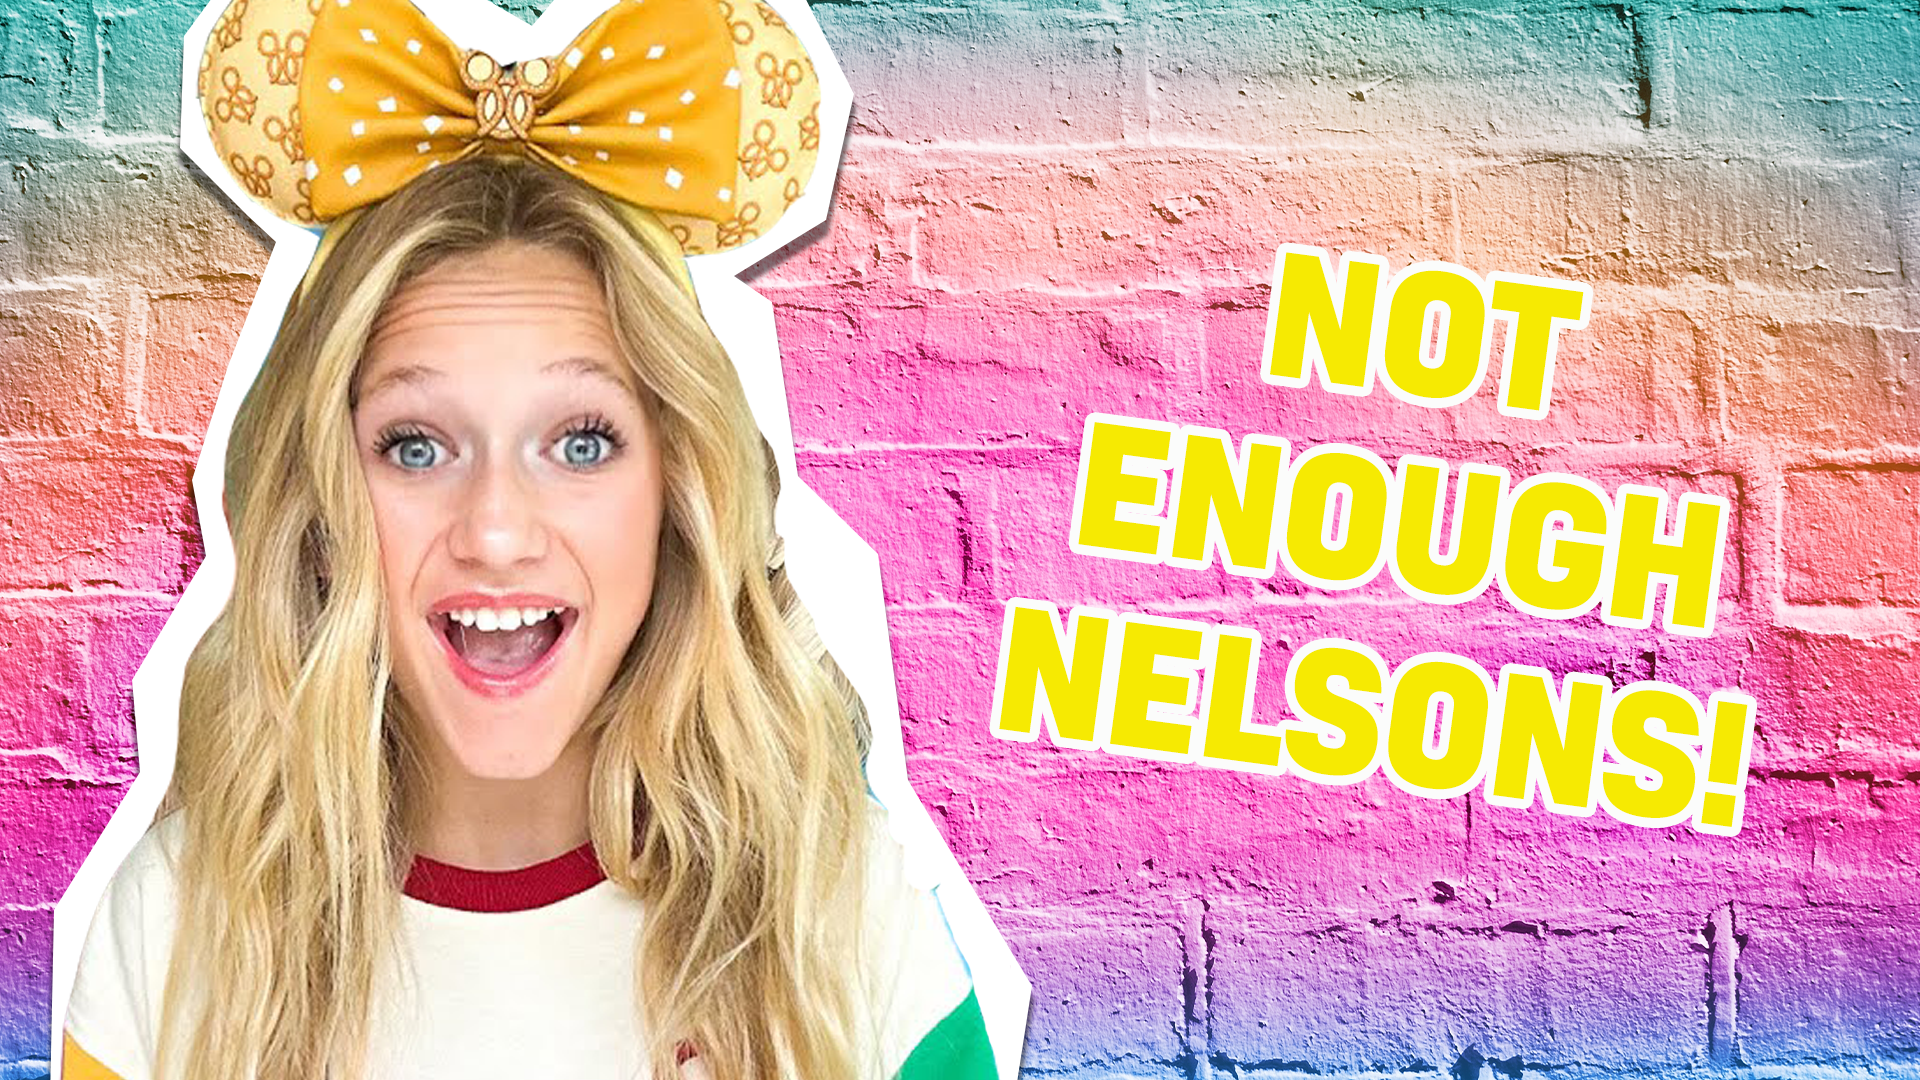 Why watch one morning routine when you can watching 16? The Nelsons embark on a chaotic GRWM video with hilarious results!